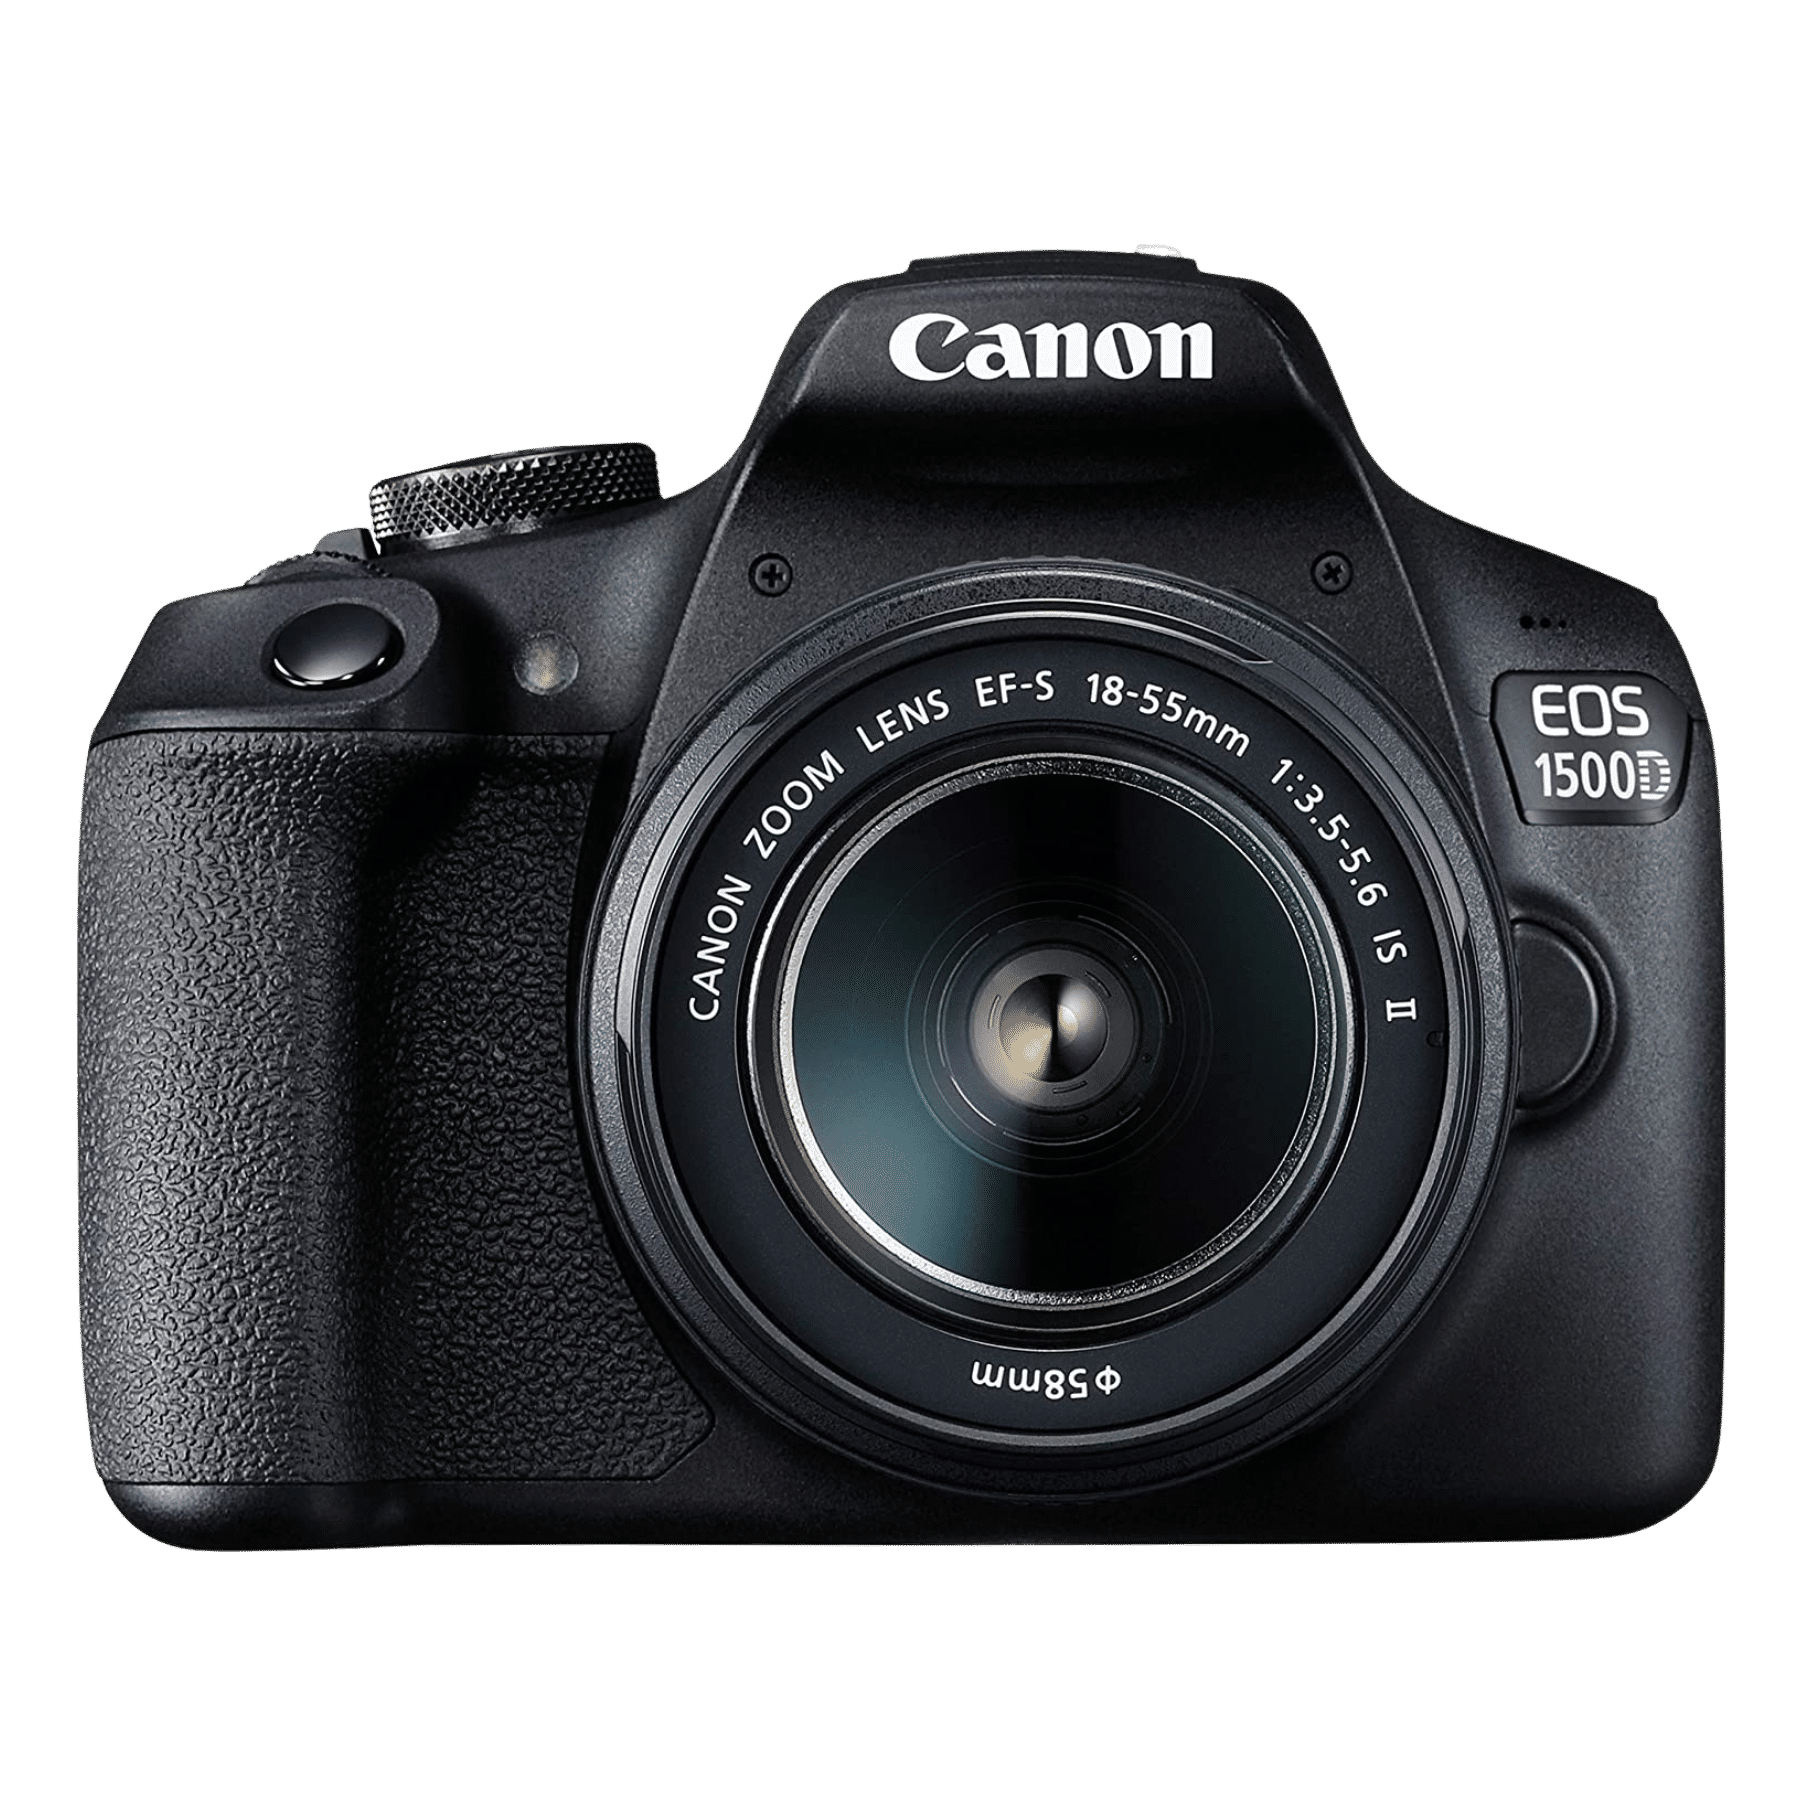 These are product images of Canon 1500D on rent by SharePal in Bangalore.